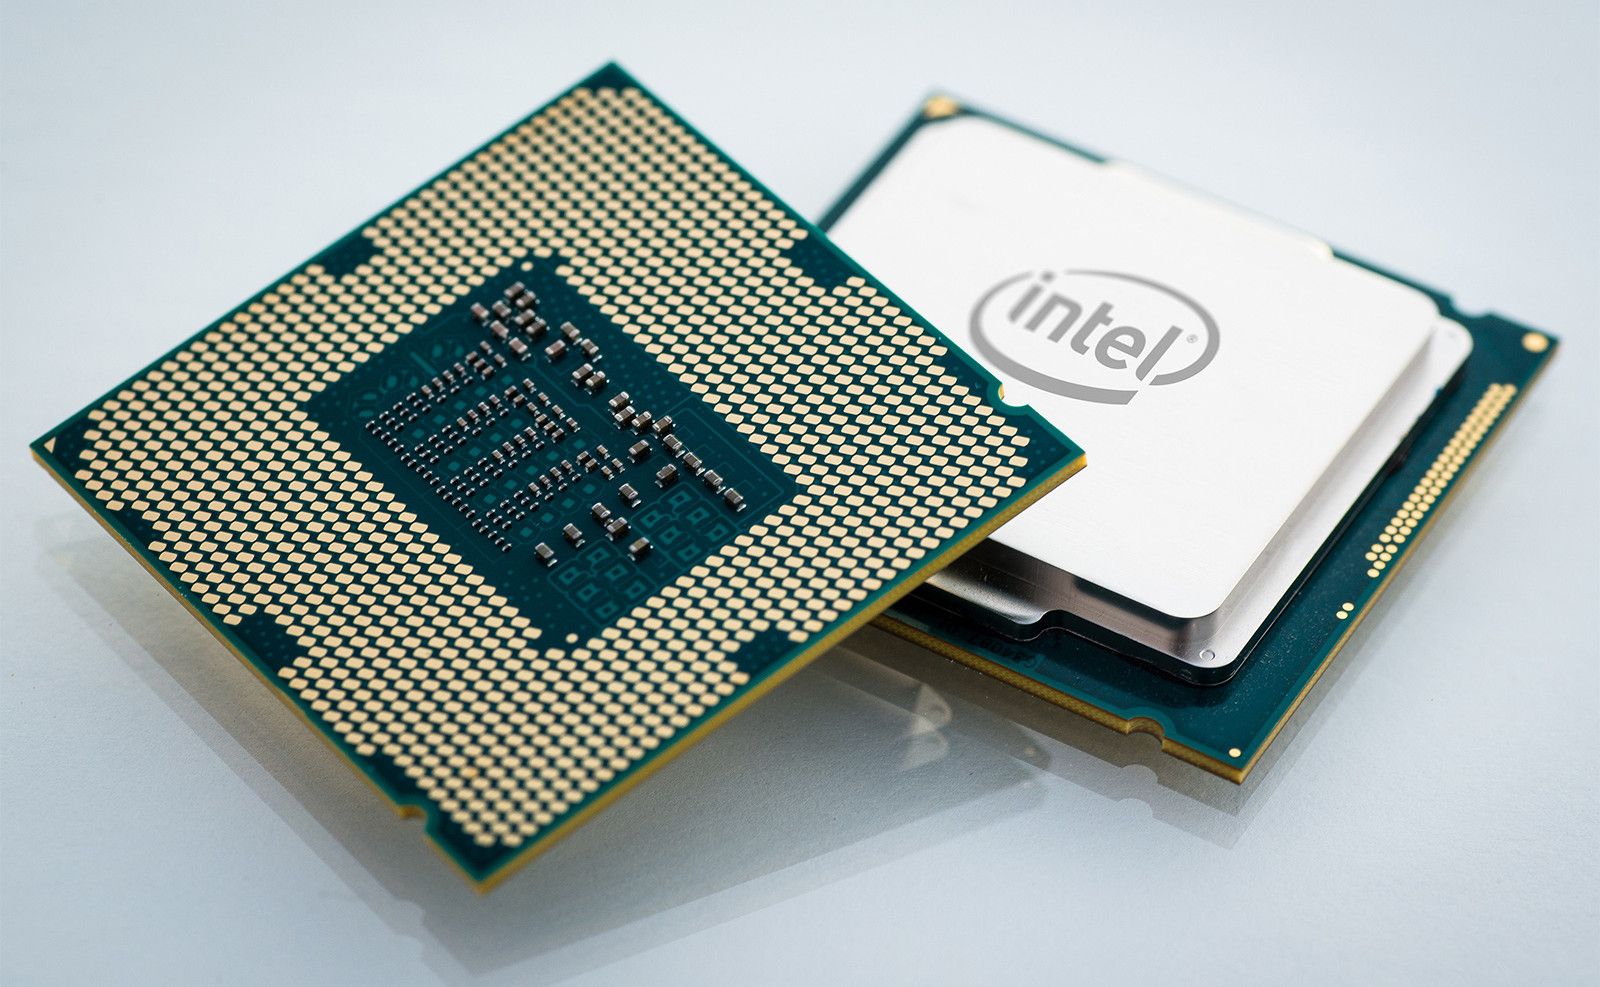 Intel Core i9 Processor Shown Back and Front